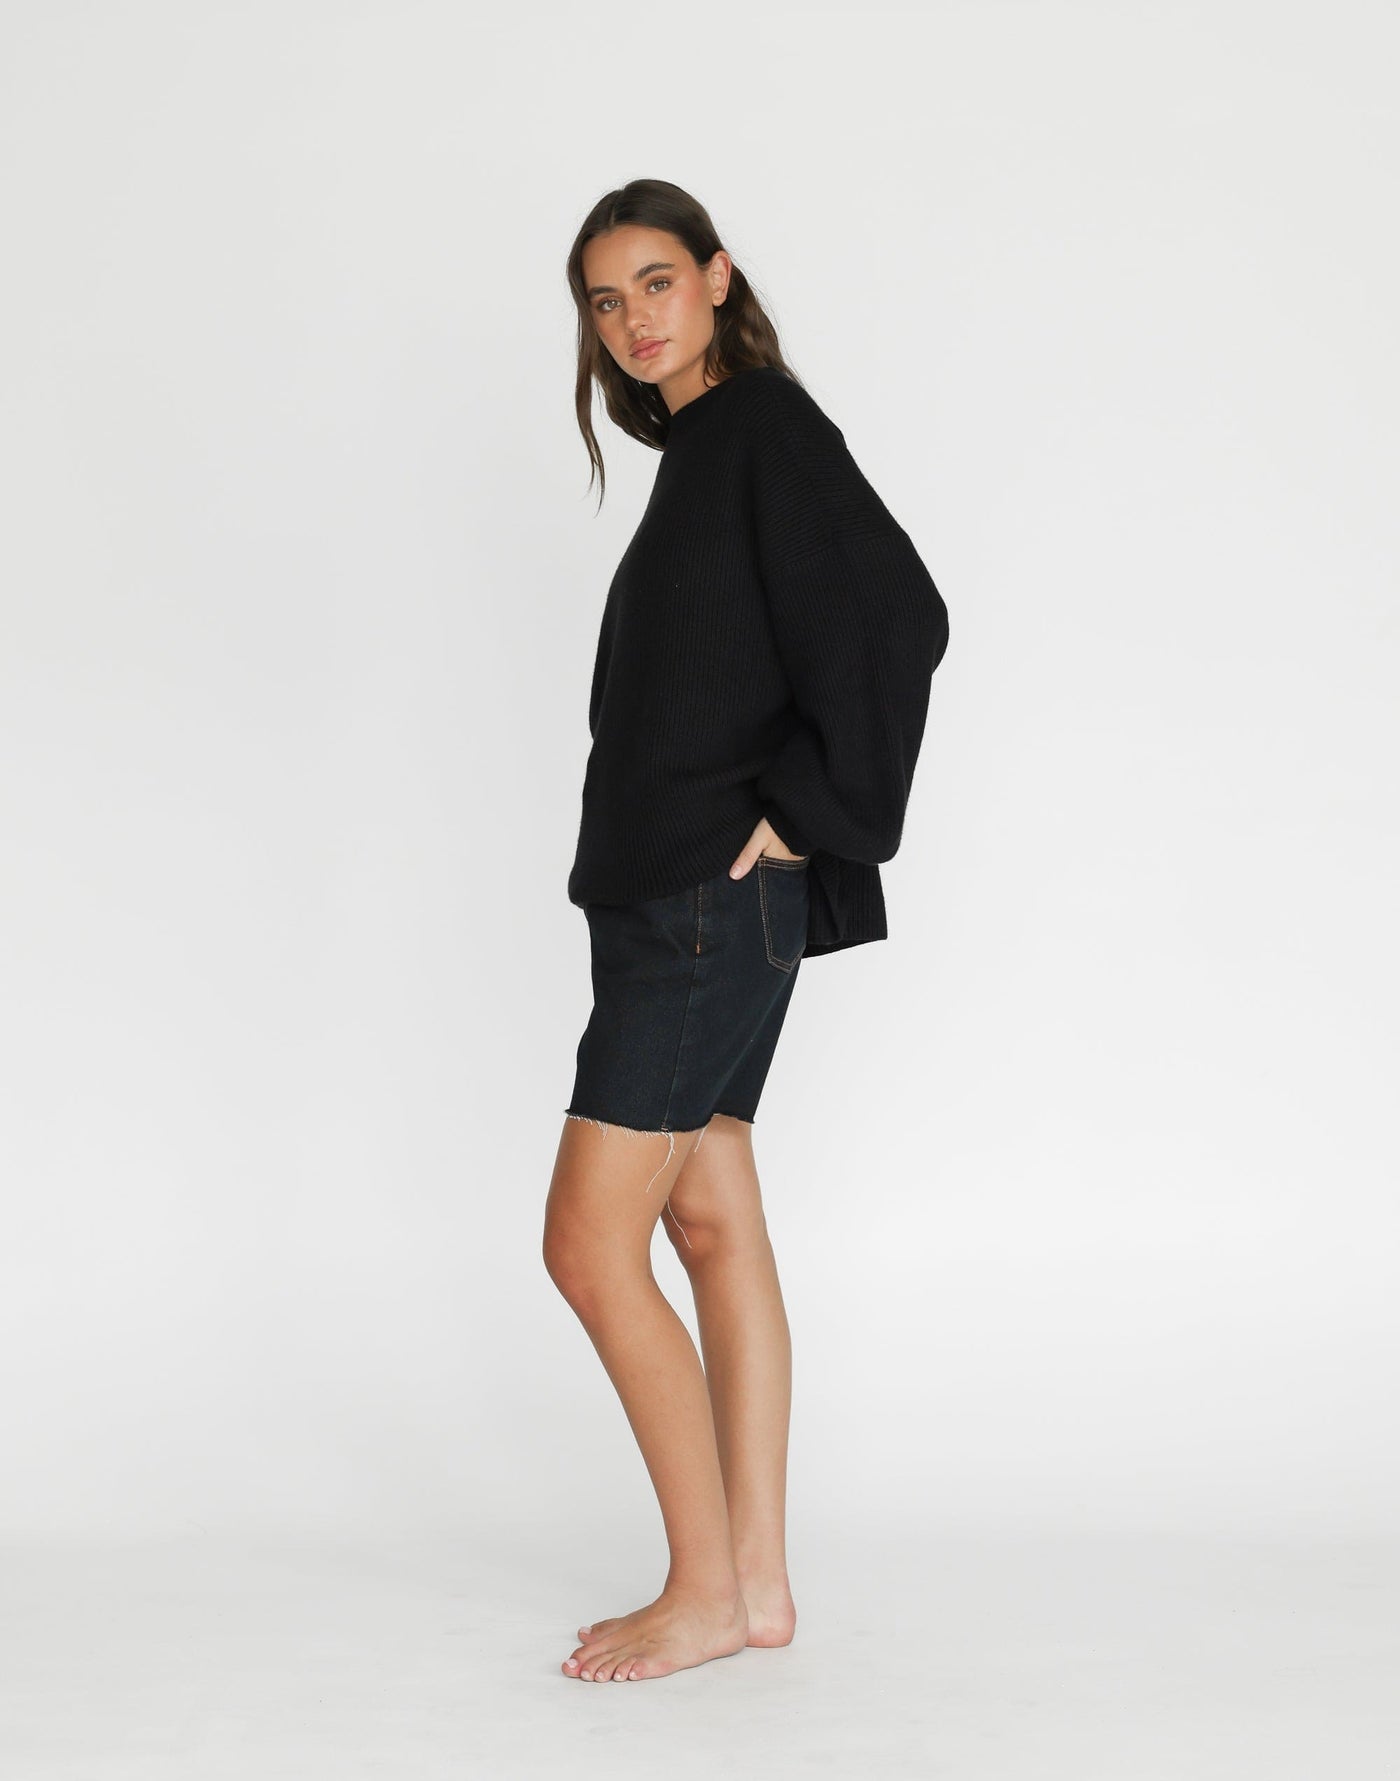 Cody Oversized Jumper (Black) | CHARCOAL Exclusive -Black Oversized Knit Jumper - Women's Top - Charcoal Clothing